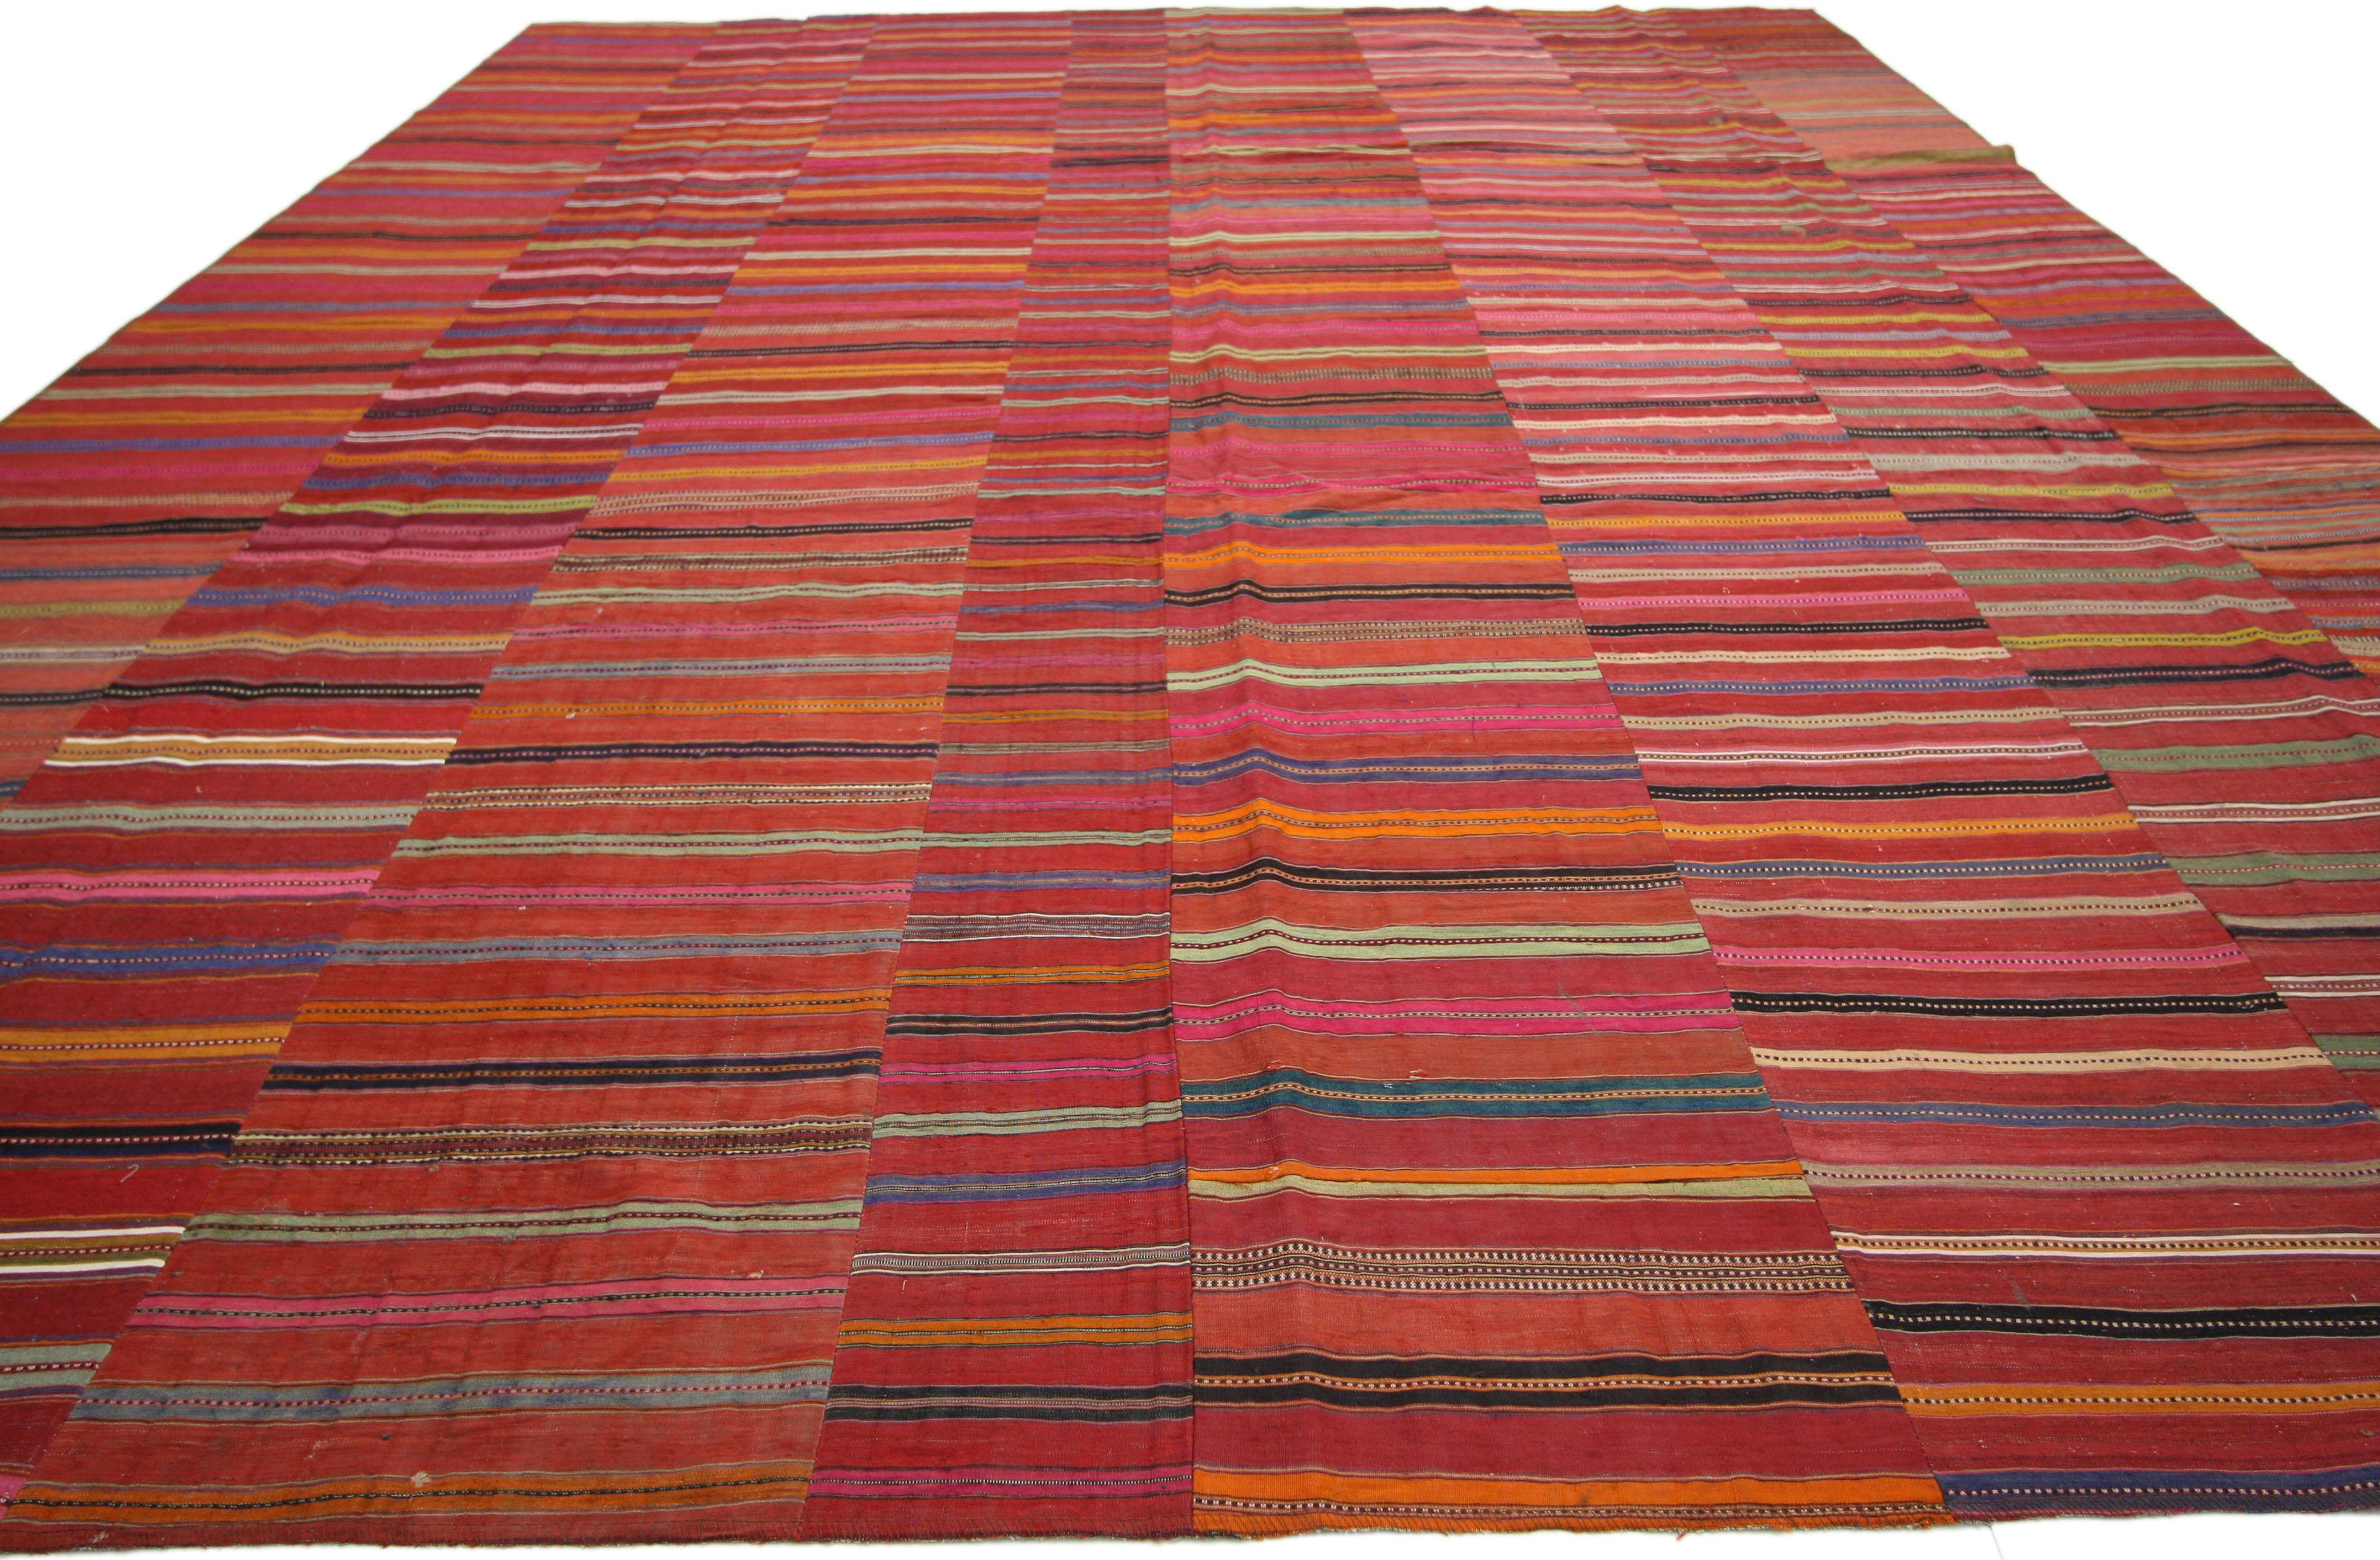 Hand-Woven Distressed Vintage Turkish Kilim Rug with Bayadere Stripes and Rustic Style